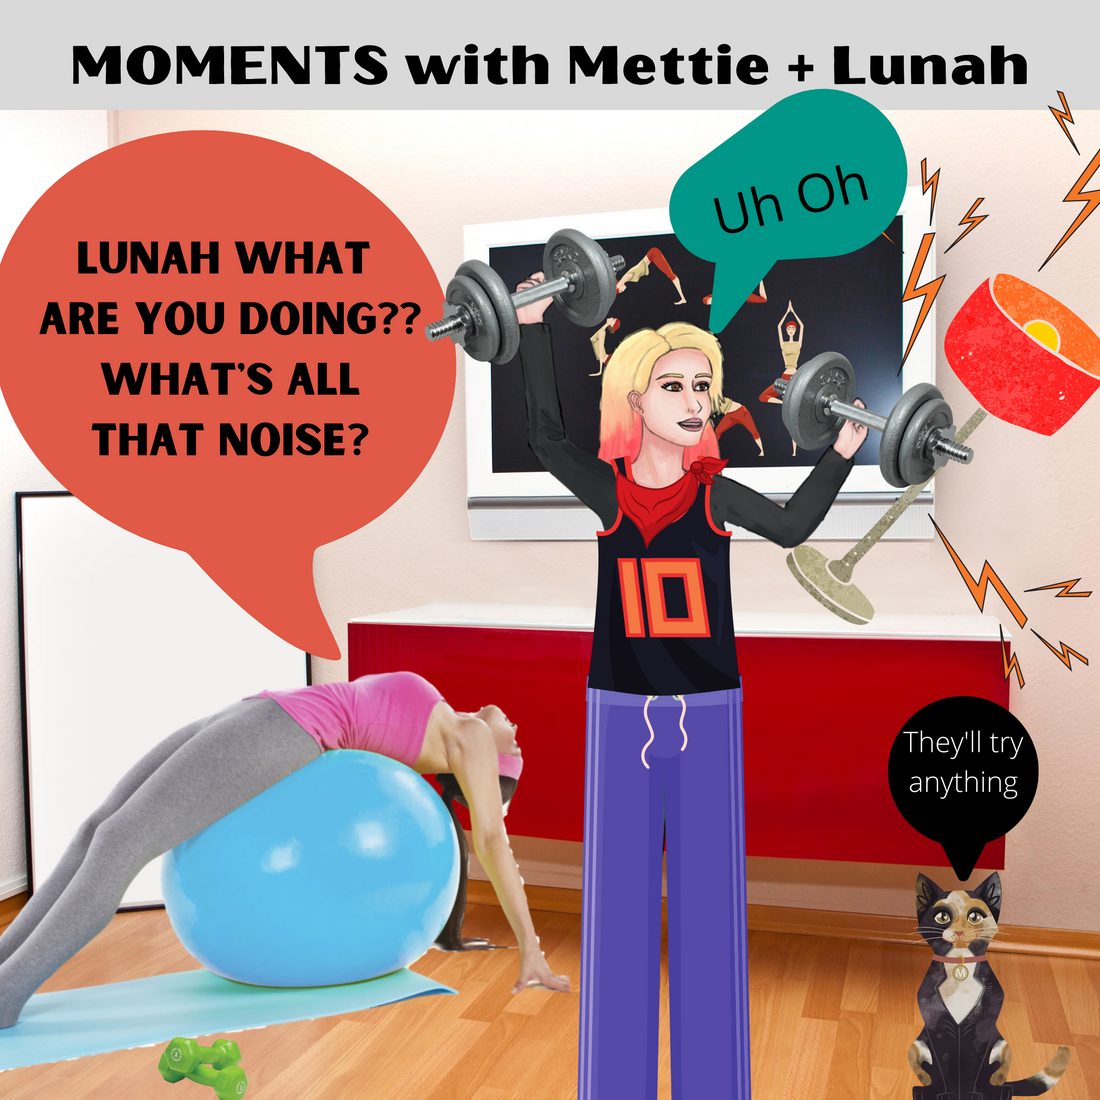 MOMENTS with Mettie + Lunah Lusso. They Try Something New in this episode